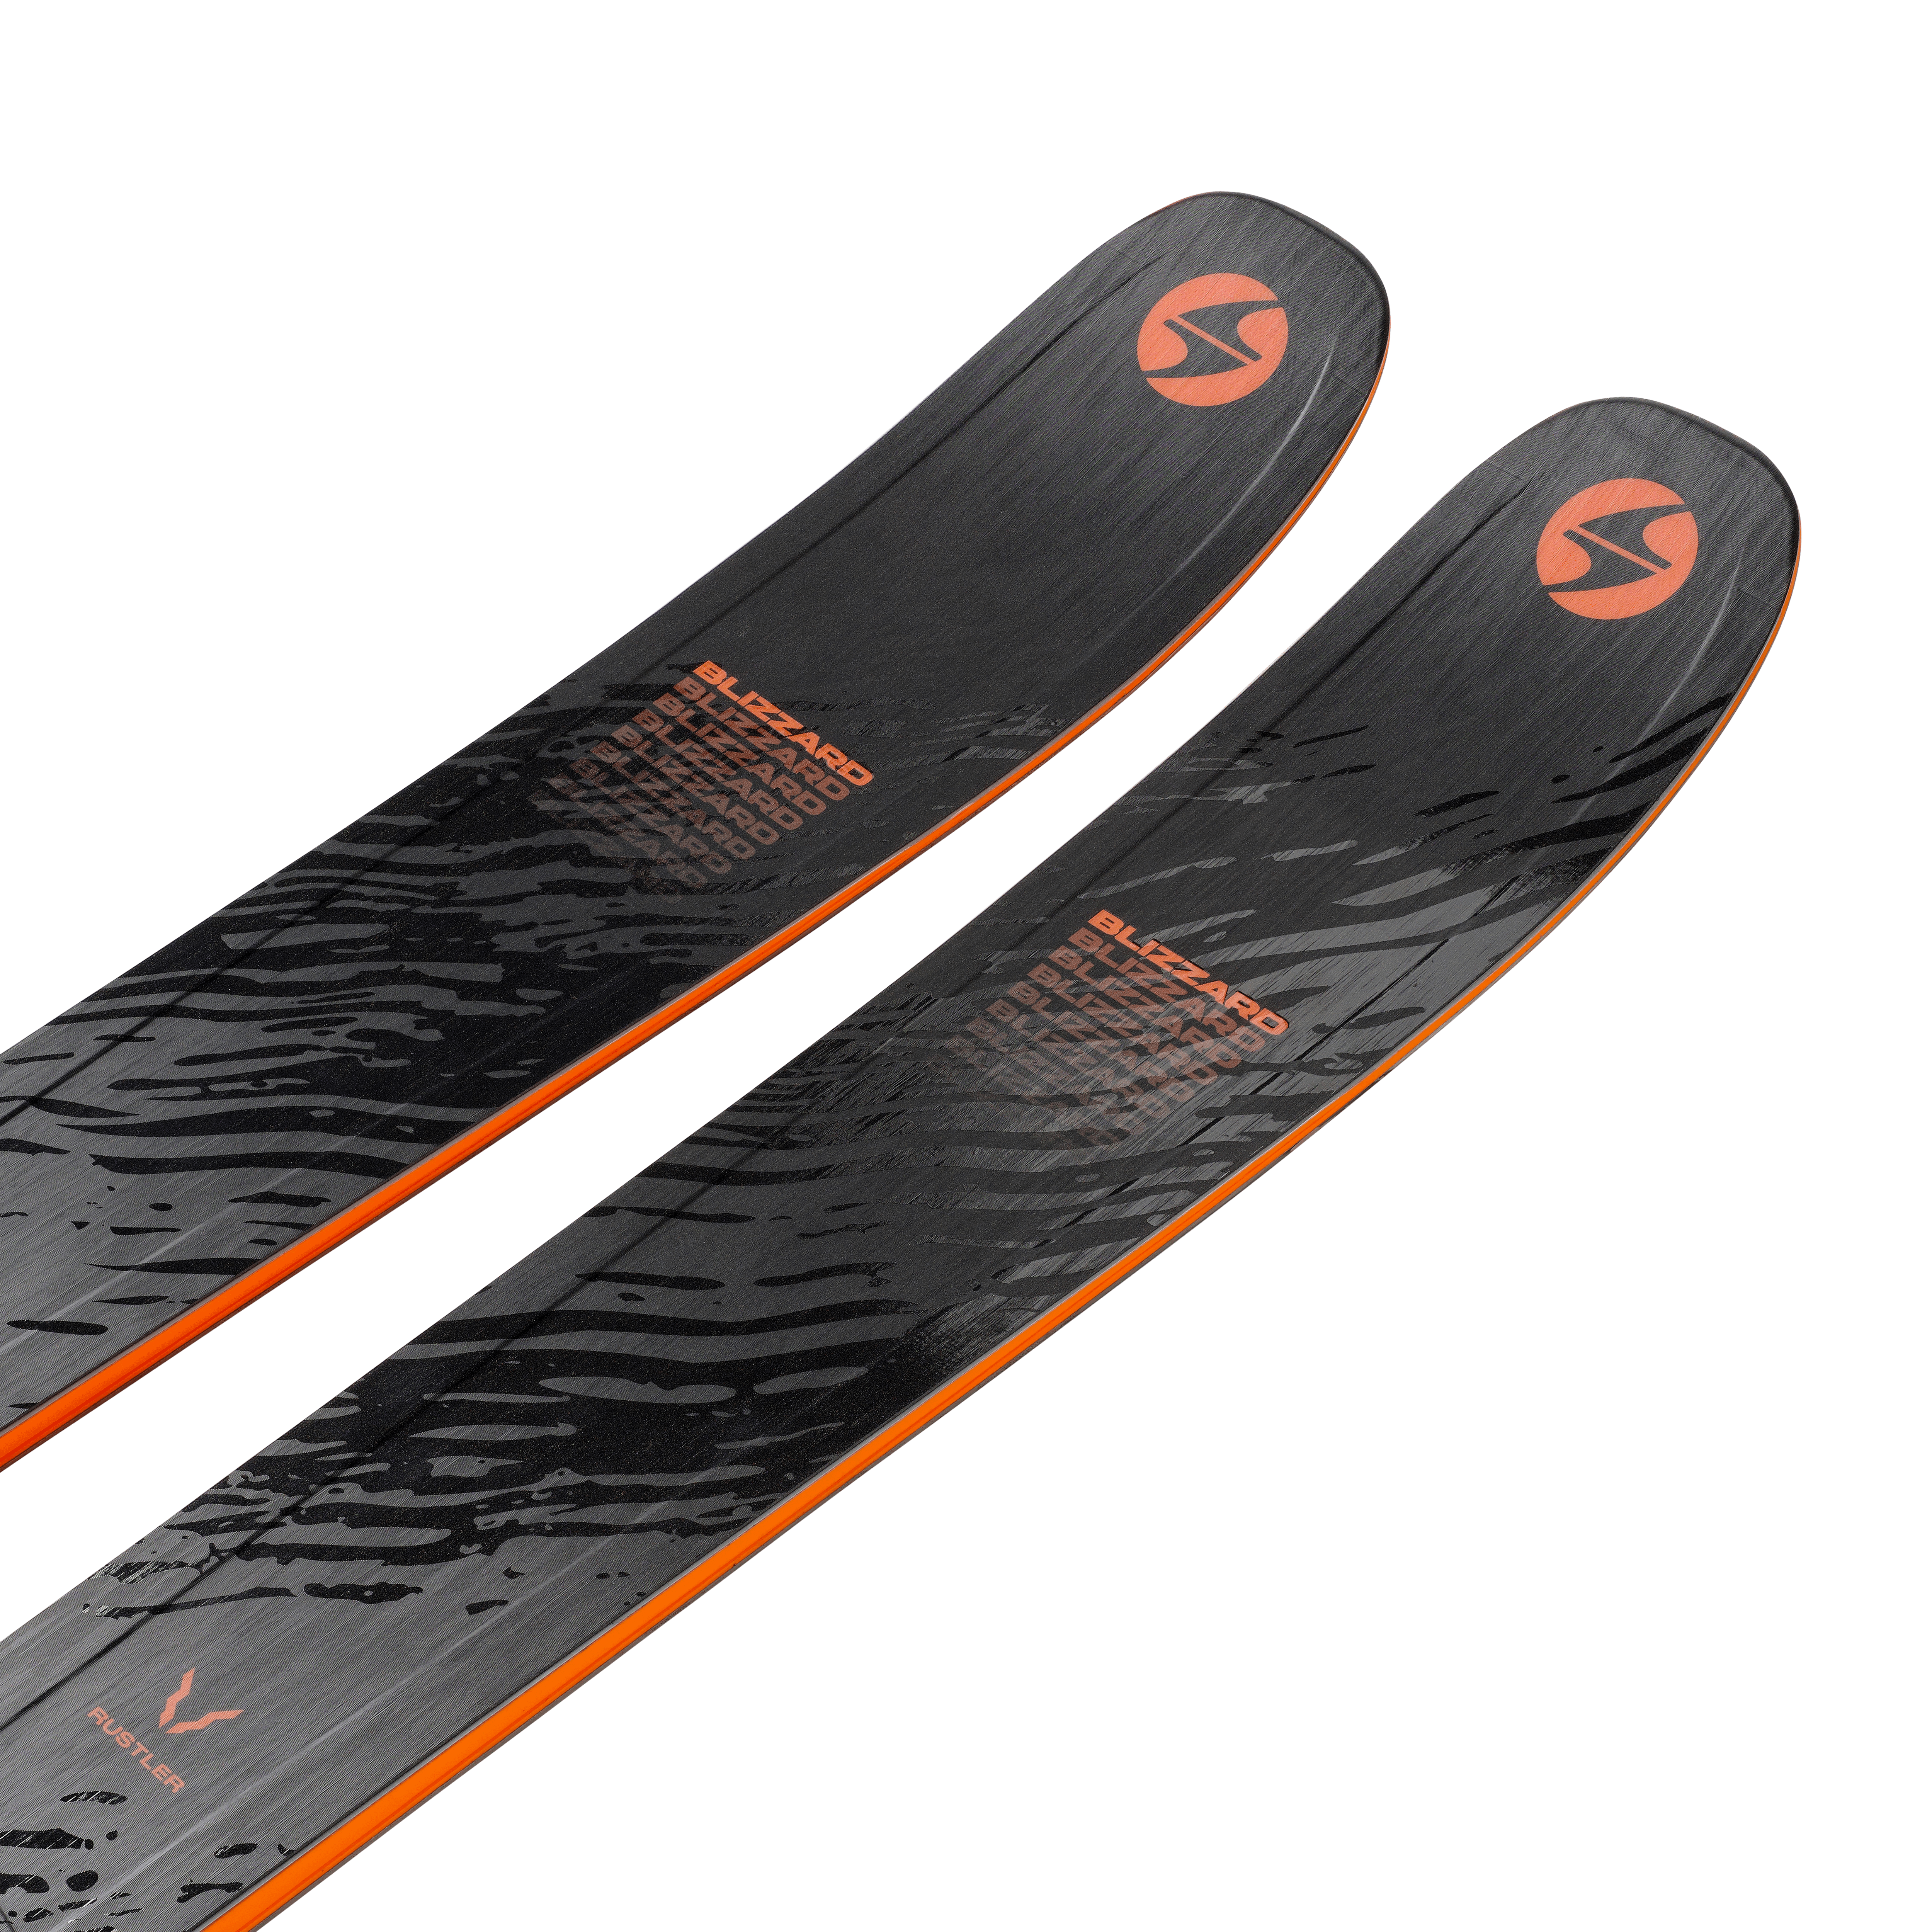 The Rustler 10 has long been praised as the holy grail of freeride skis, and while that's quite the claim to hang your hat on, we've never been the type to settle. 